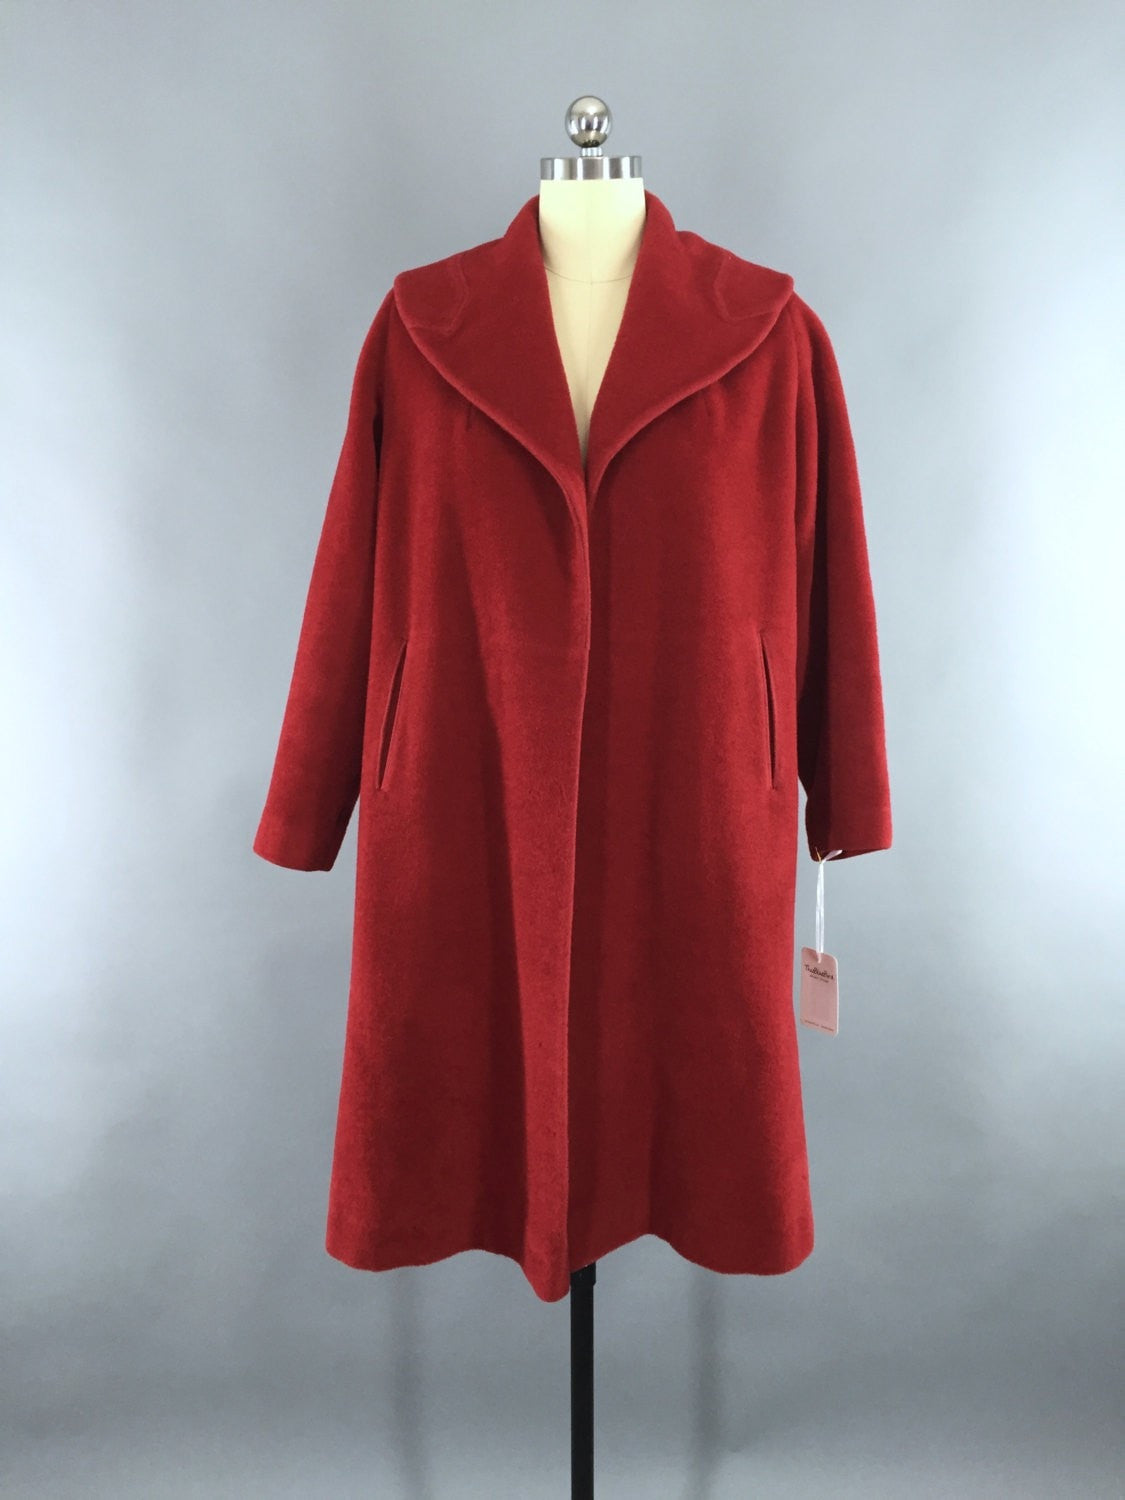 Vintage 1950s Red Charmosa Wool New Look Swing Coat - ThisBlueBird